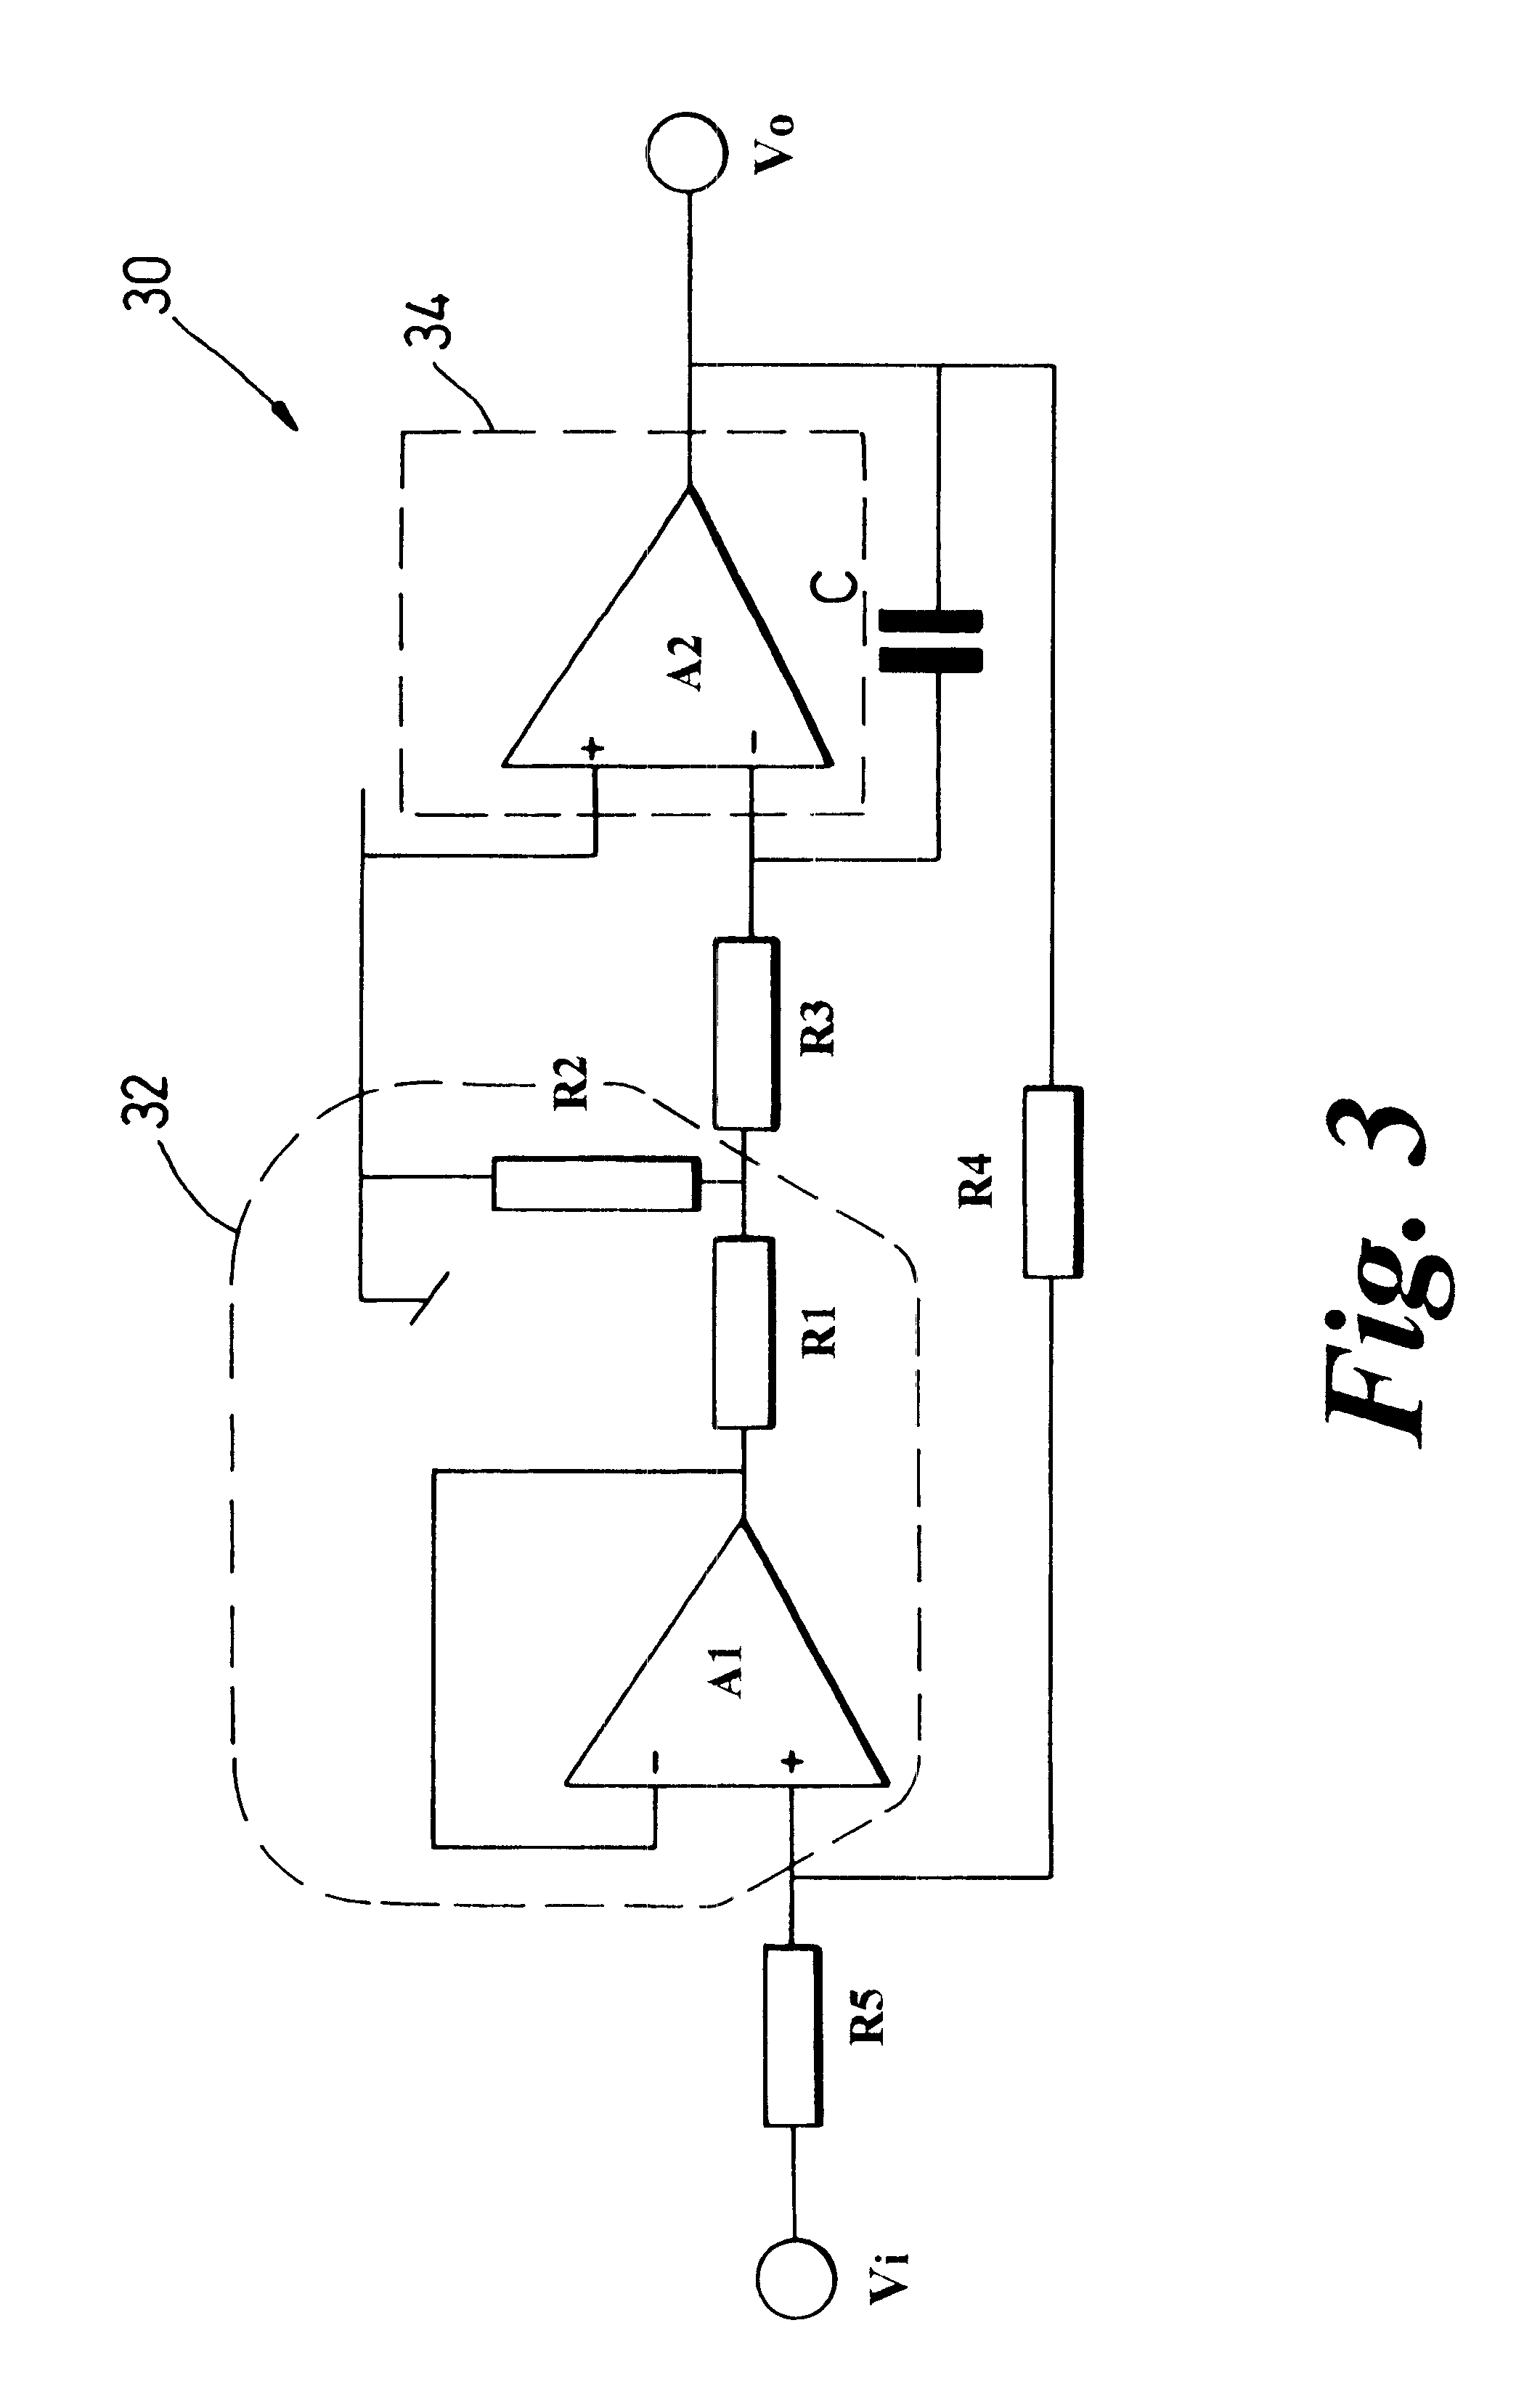 Fully integrated long time constant integrator circuit